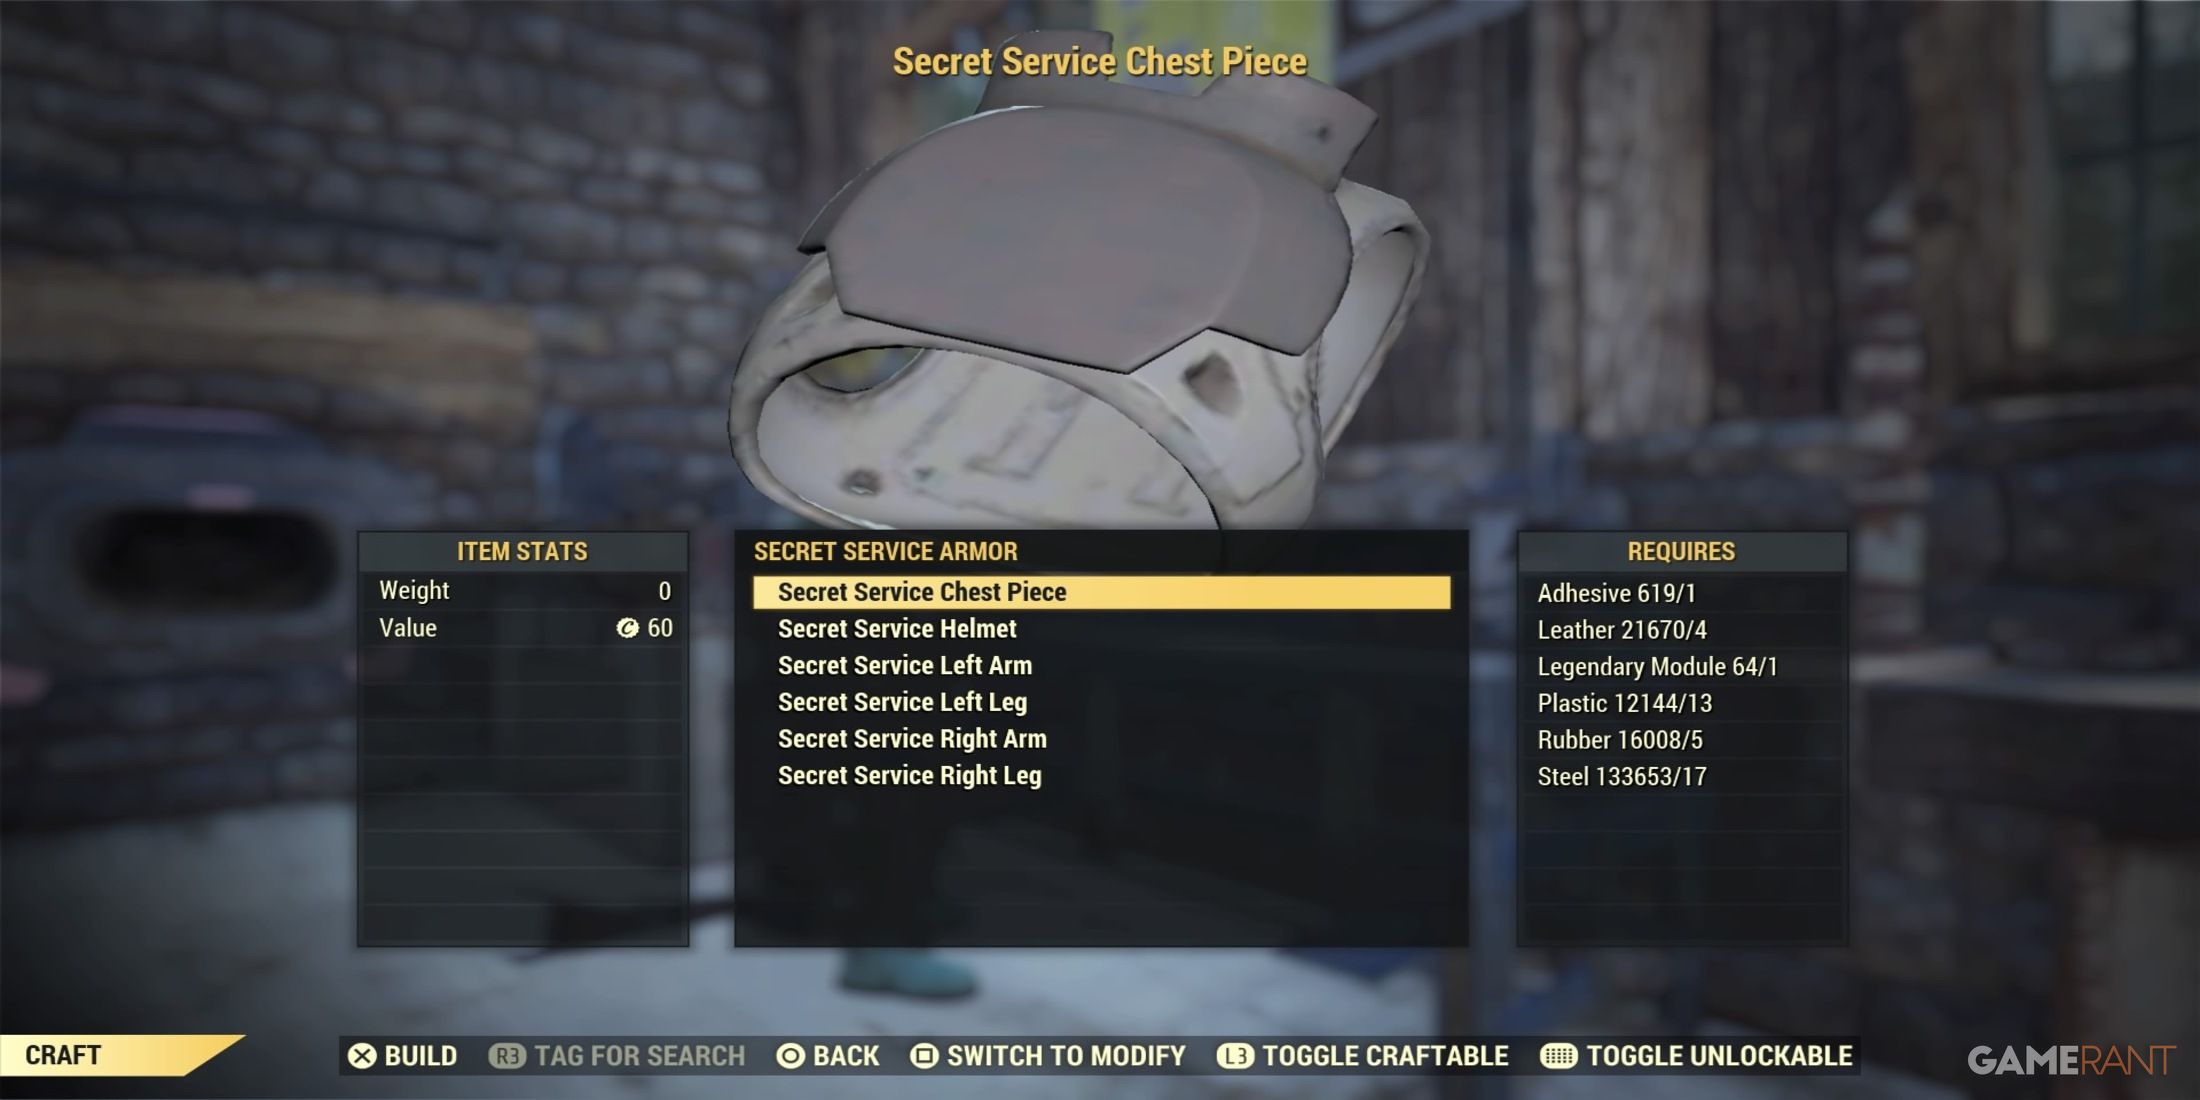 Crafting A Secret Service Chest Piece in Fallout 76